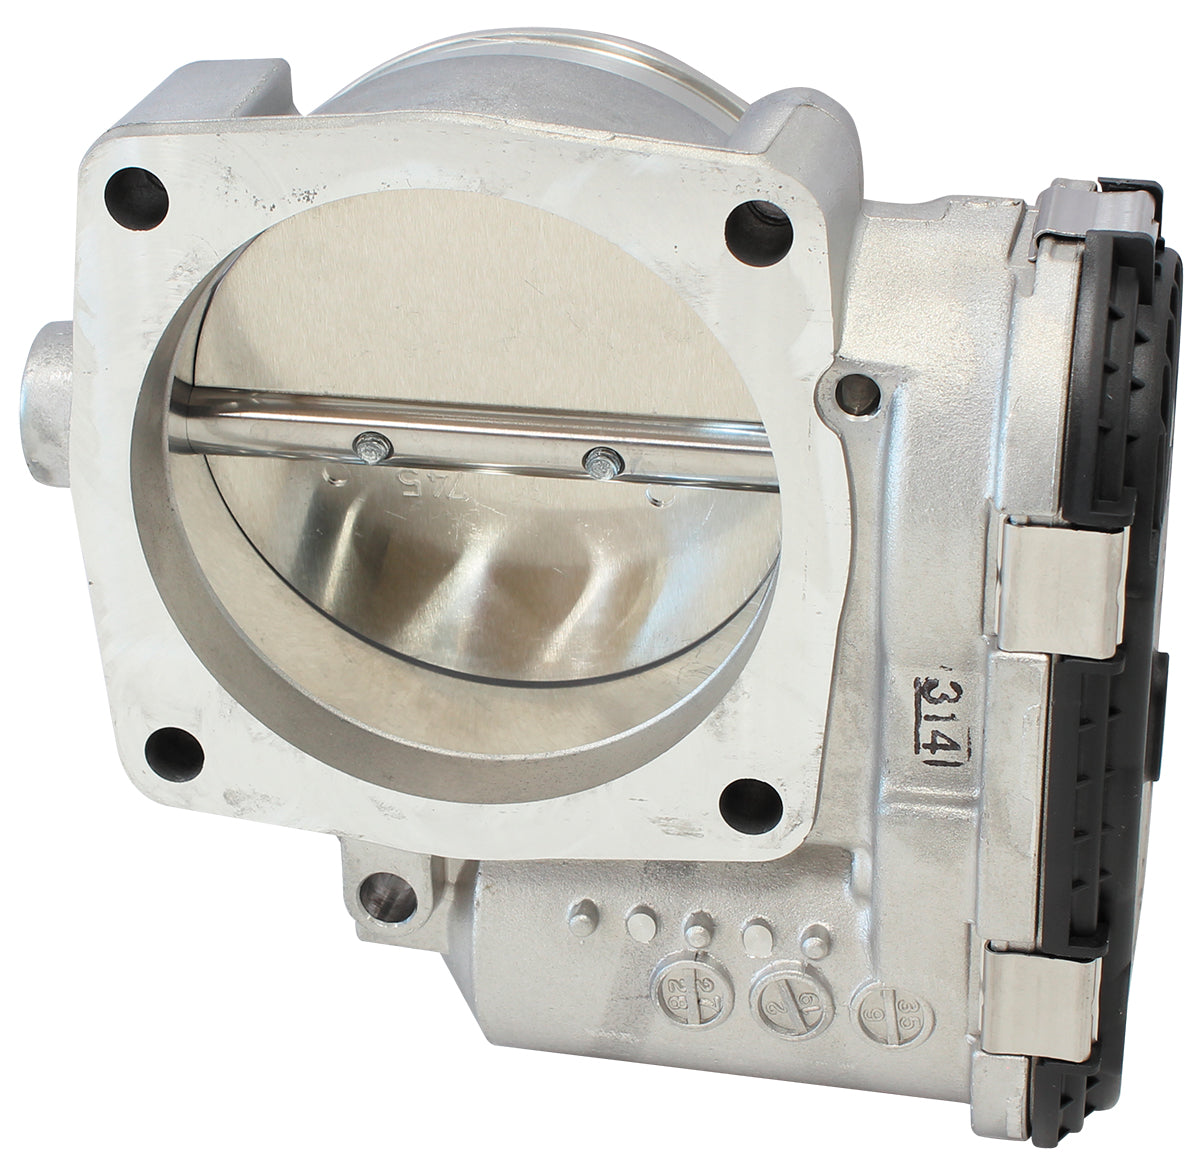 AF64-2135 - Bosch Motorsport 74mm DBW Electronic Throttle Body Suit Drive By Wire Applications